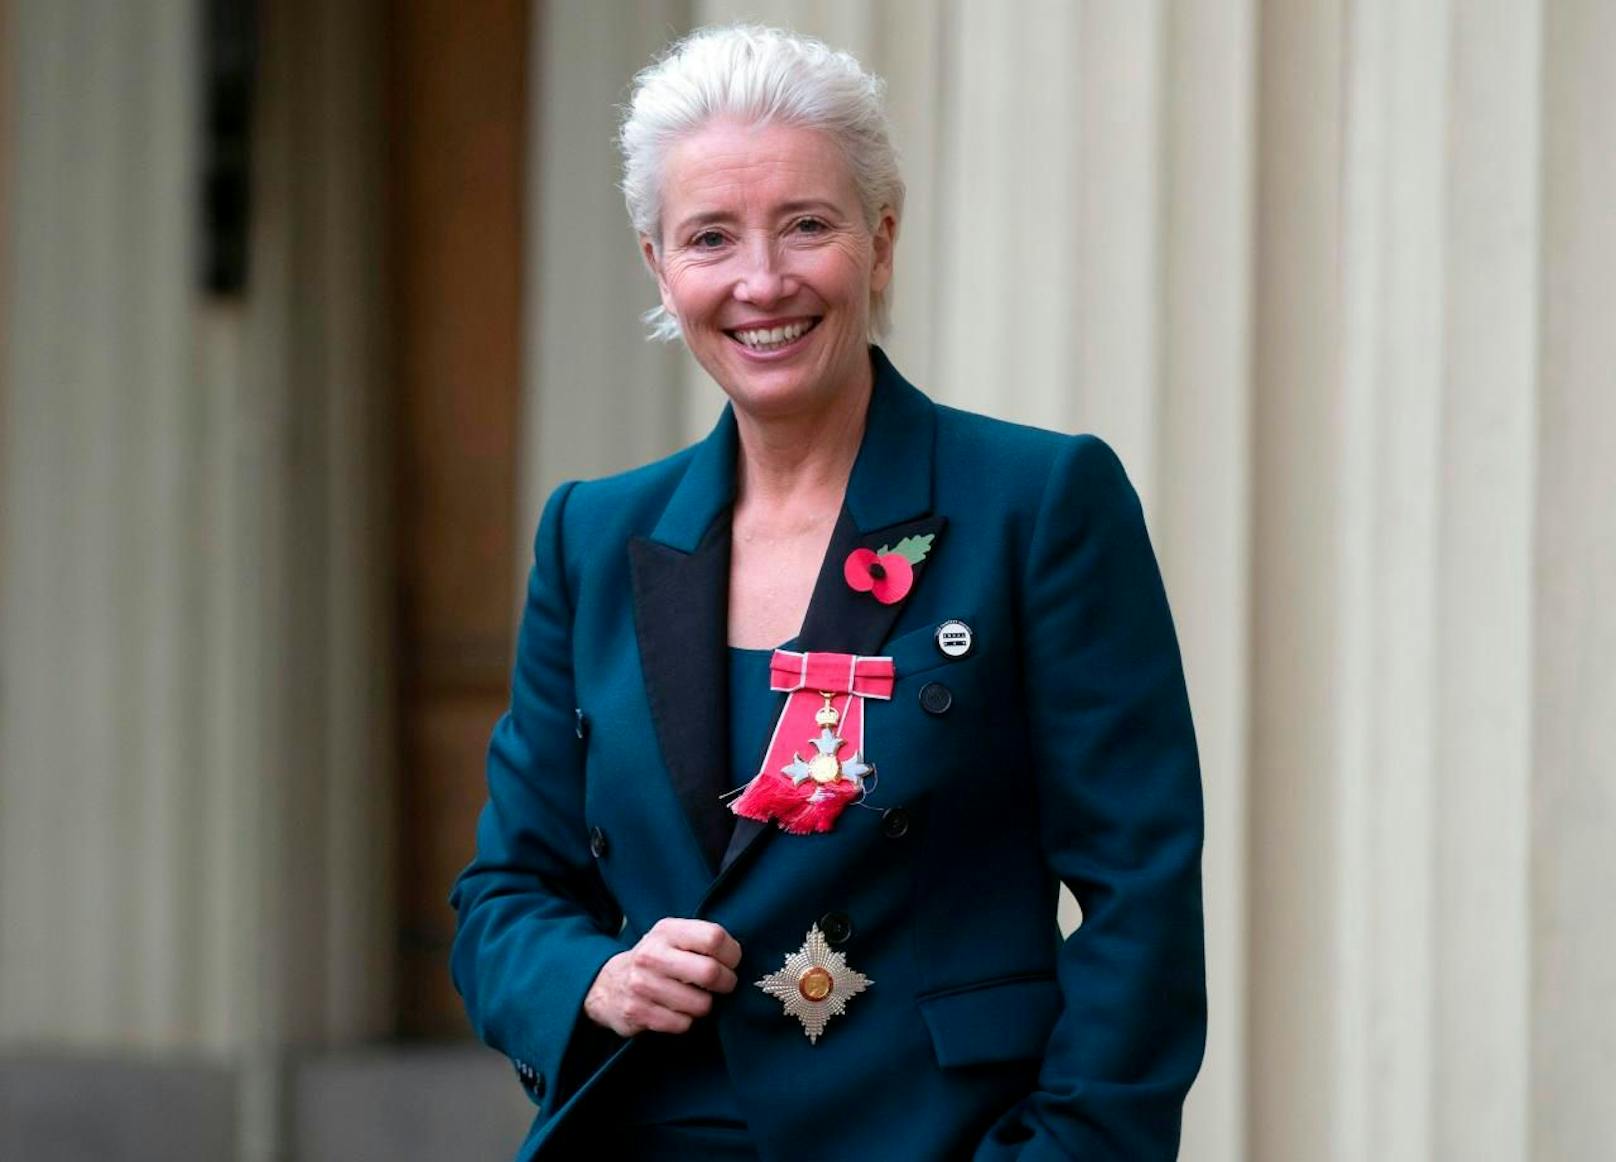 Stolz mit Orden: Emma Thompson ist jetzt Dame Commander of the Order of the British Empire (DBE) 